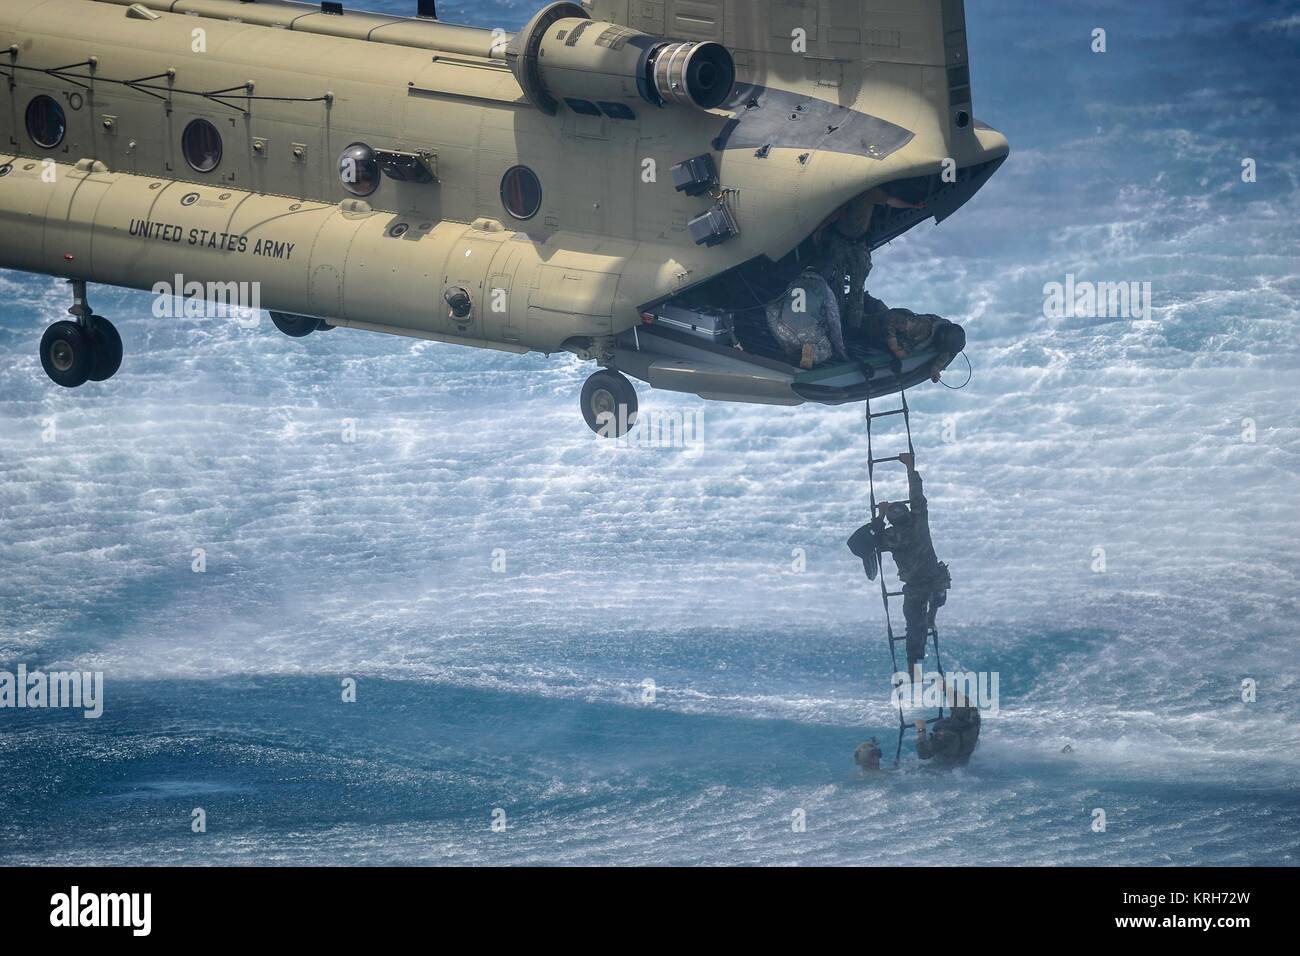 A Belize Coast Guard officer climbs a Jacobs Ladder on to a Boeing CH-47 Chinook helicopter during a training mission July 18, 2016 off the coast of Belize City, Belize. Stock Photo